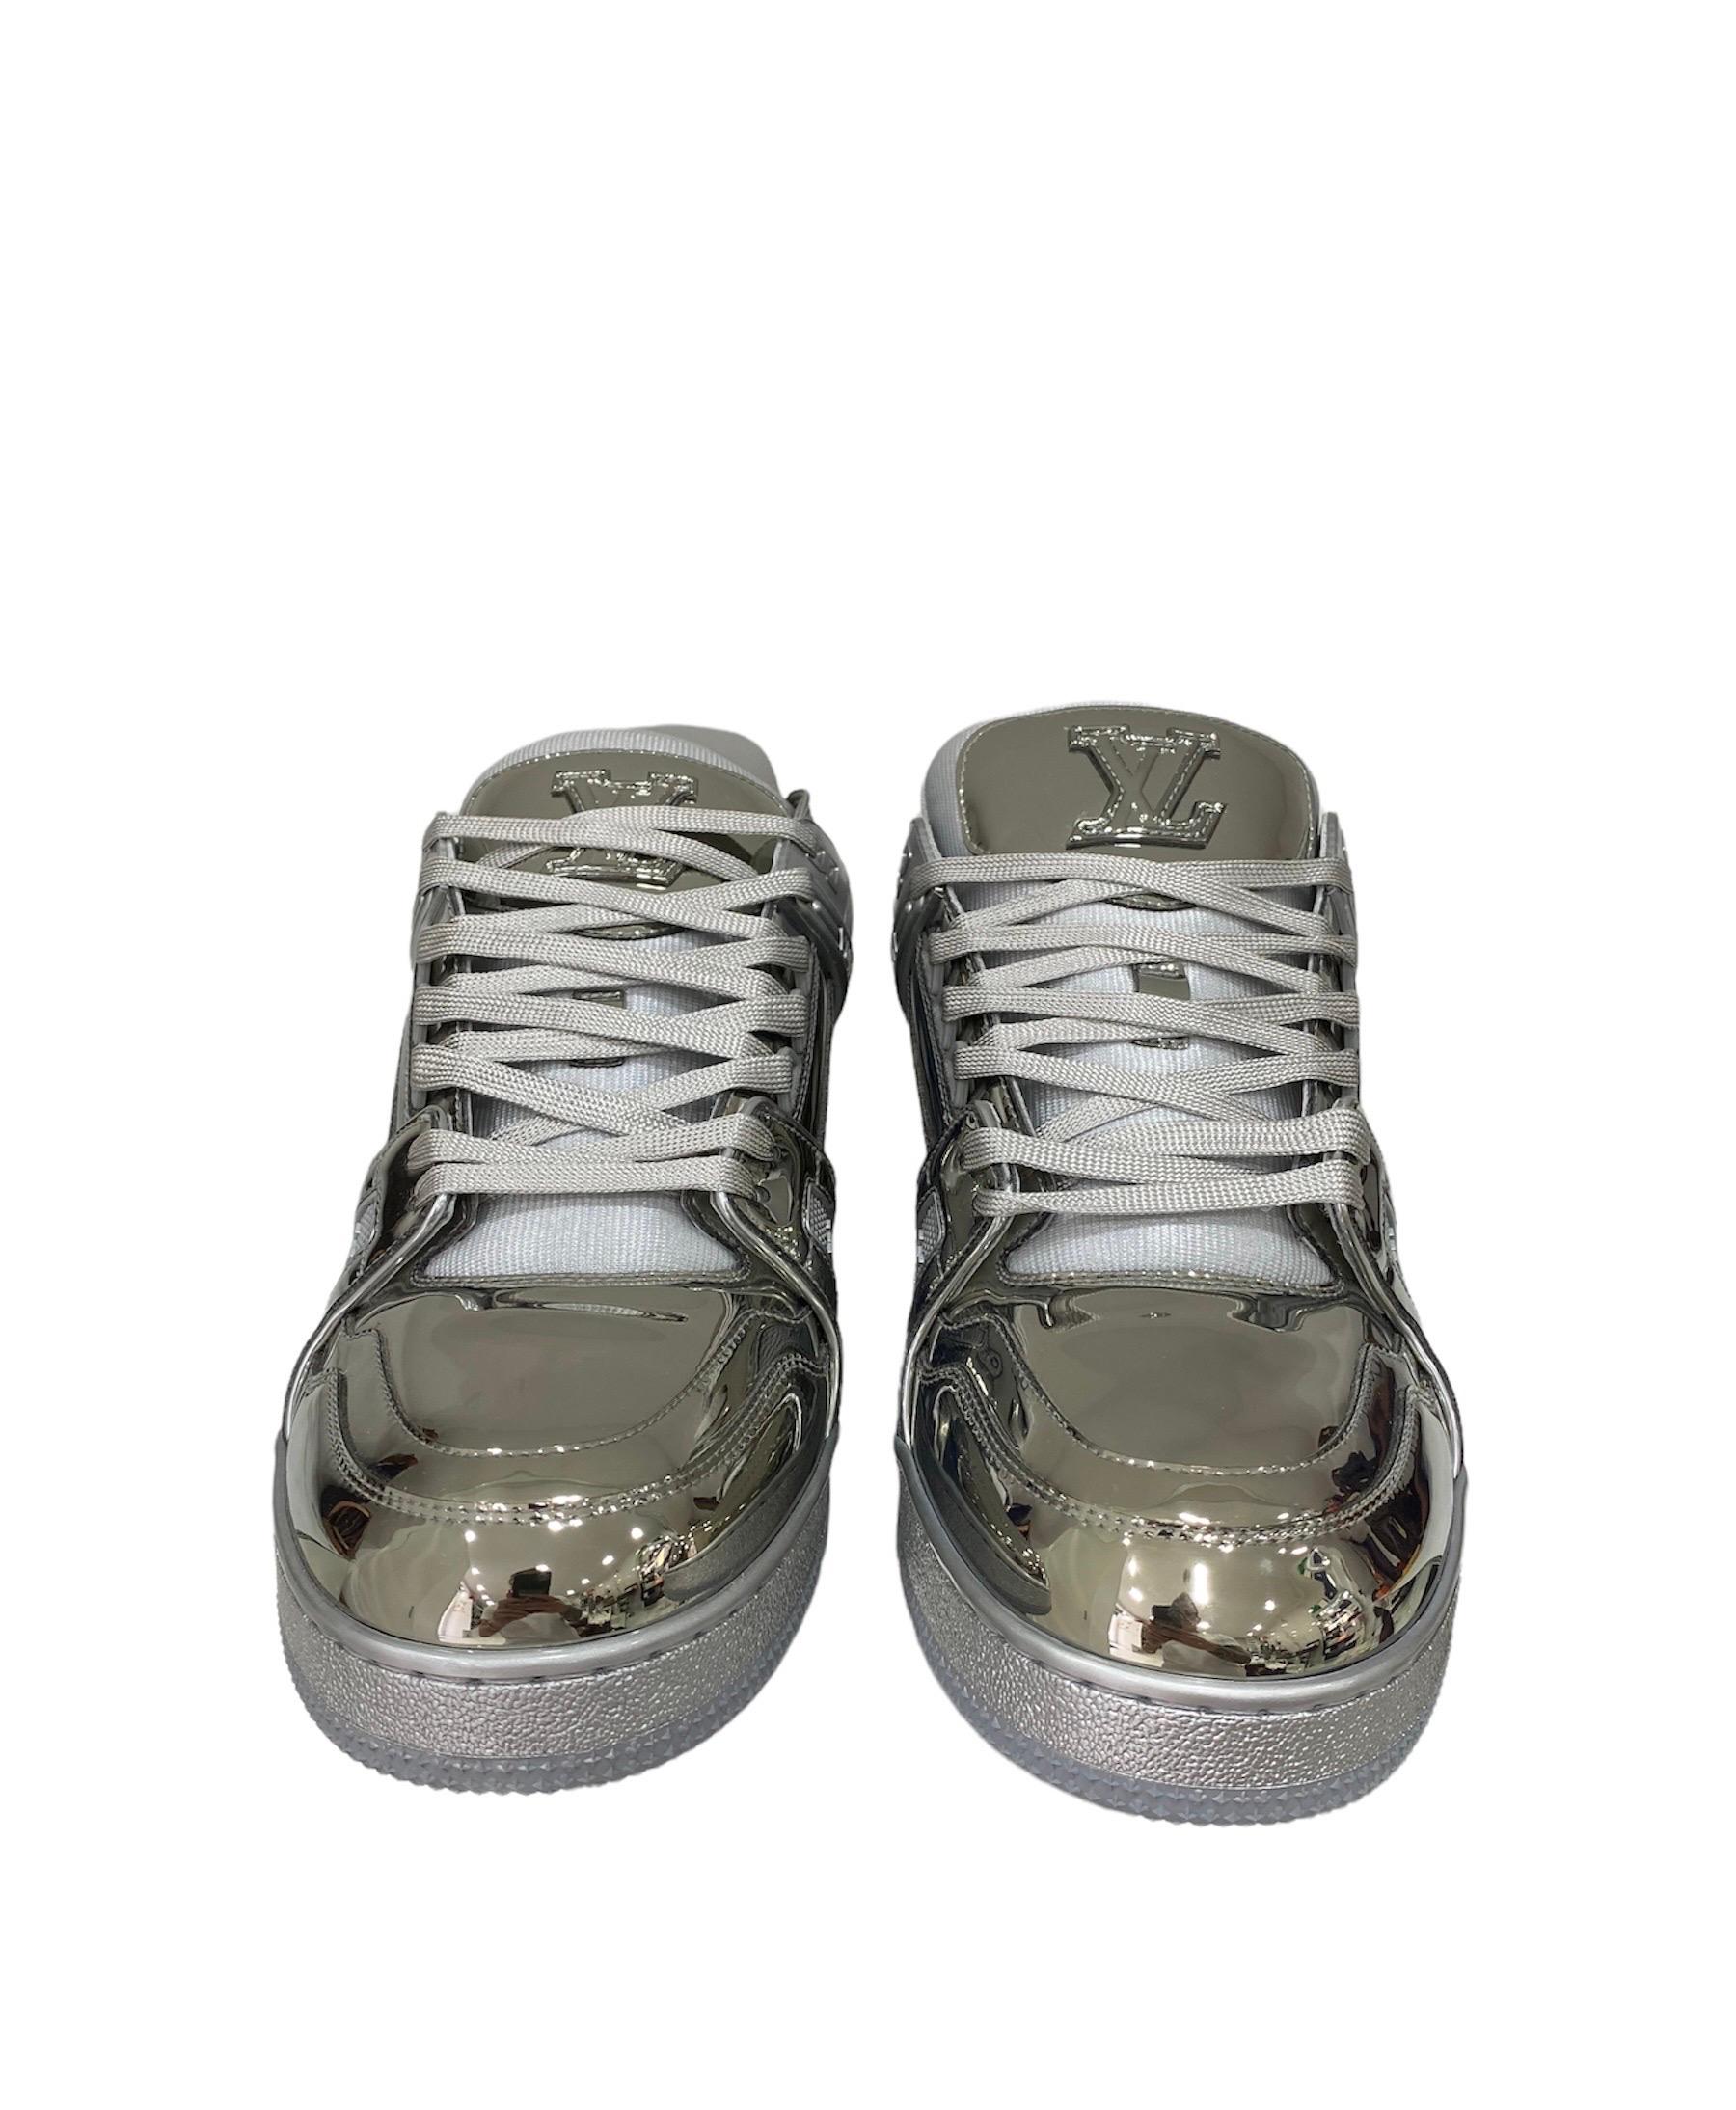 Sneakers for use by Vuitton, Trainer model, made of silver mirror paint number 44 EU. Worn are for testing as you can see from the photos. Complete with box, like new conditions.